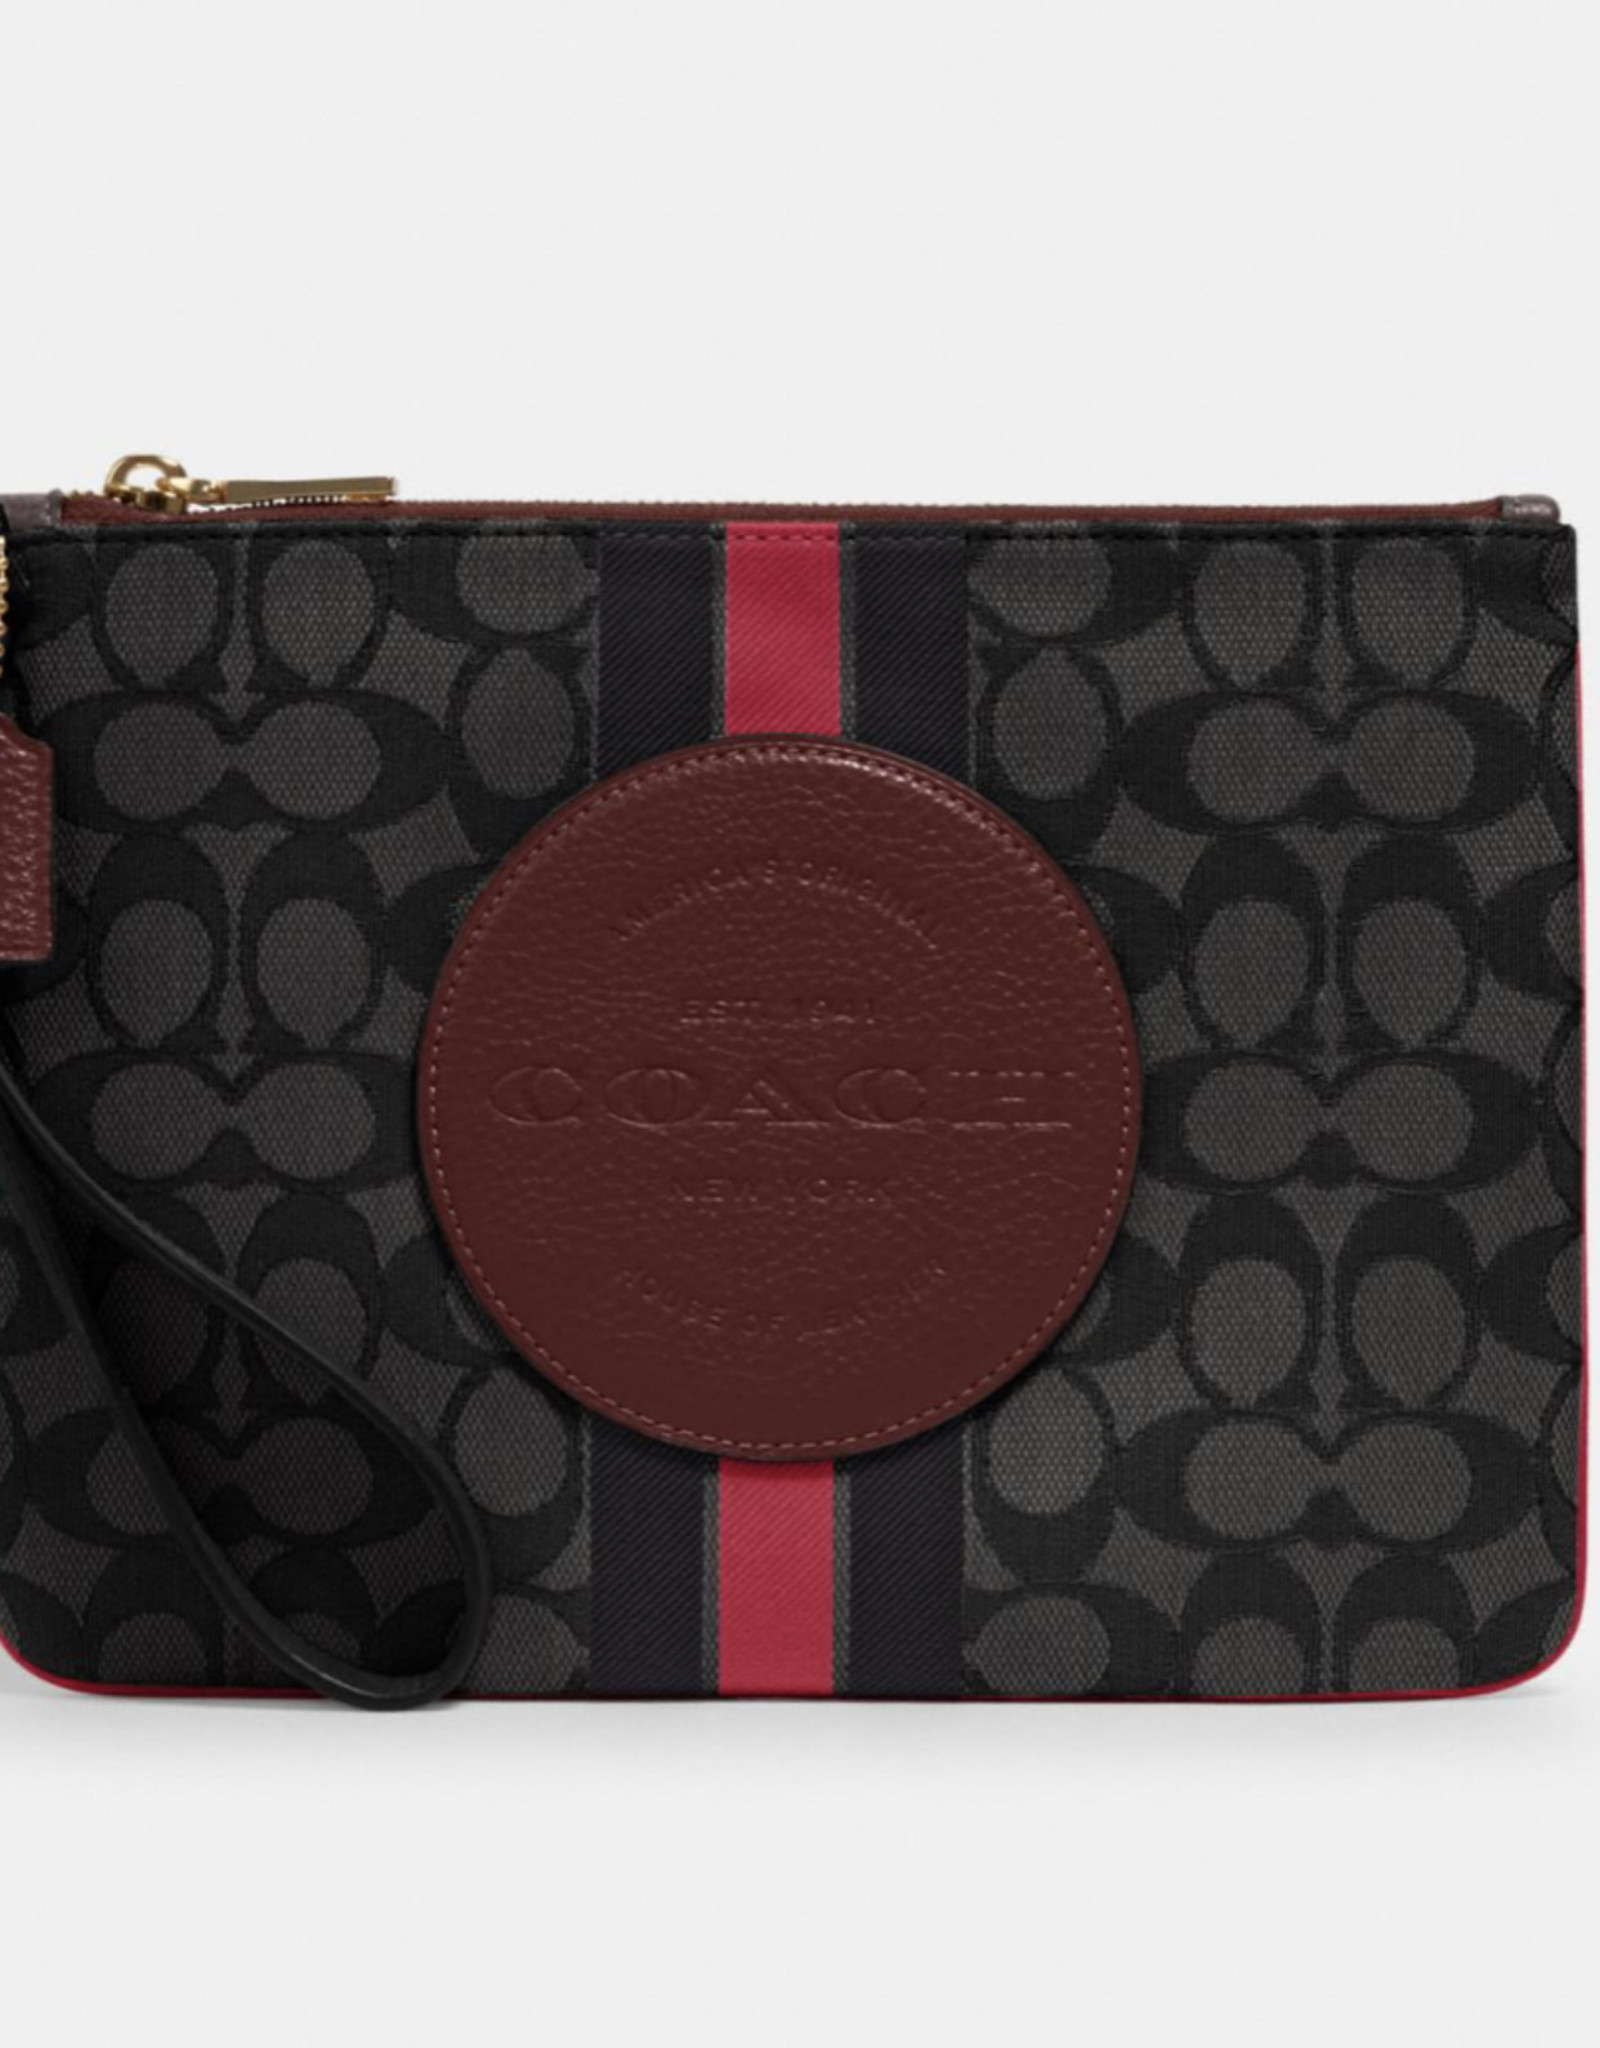 Coach Coach Dempsey Gallery Pouch Sig Jacquard with Stripe & Coach Patch